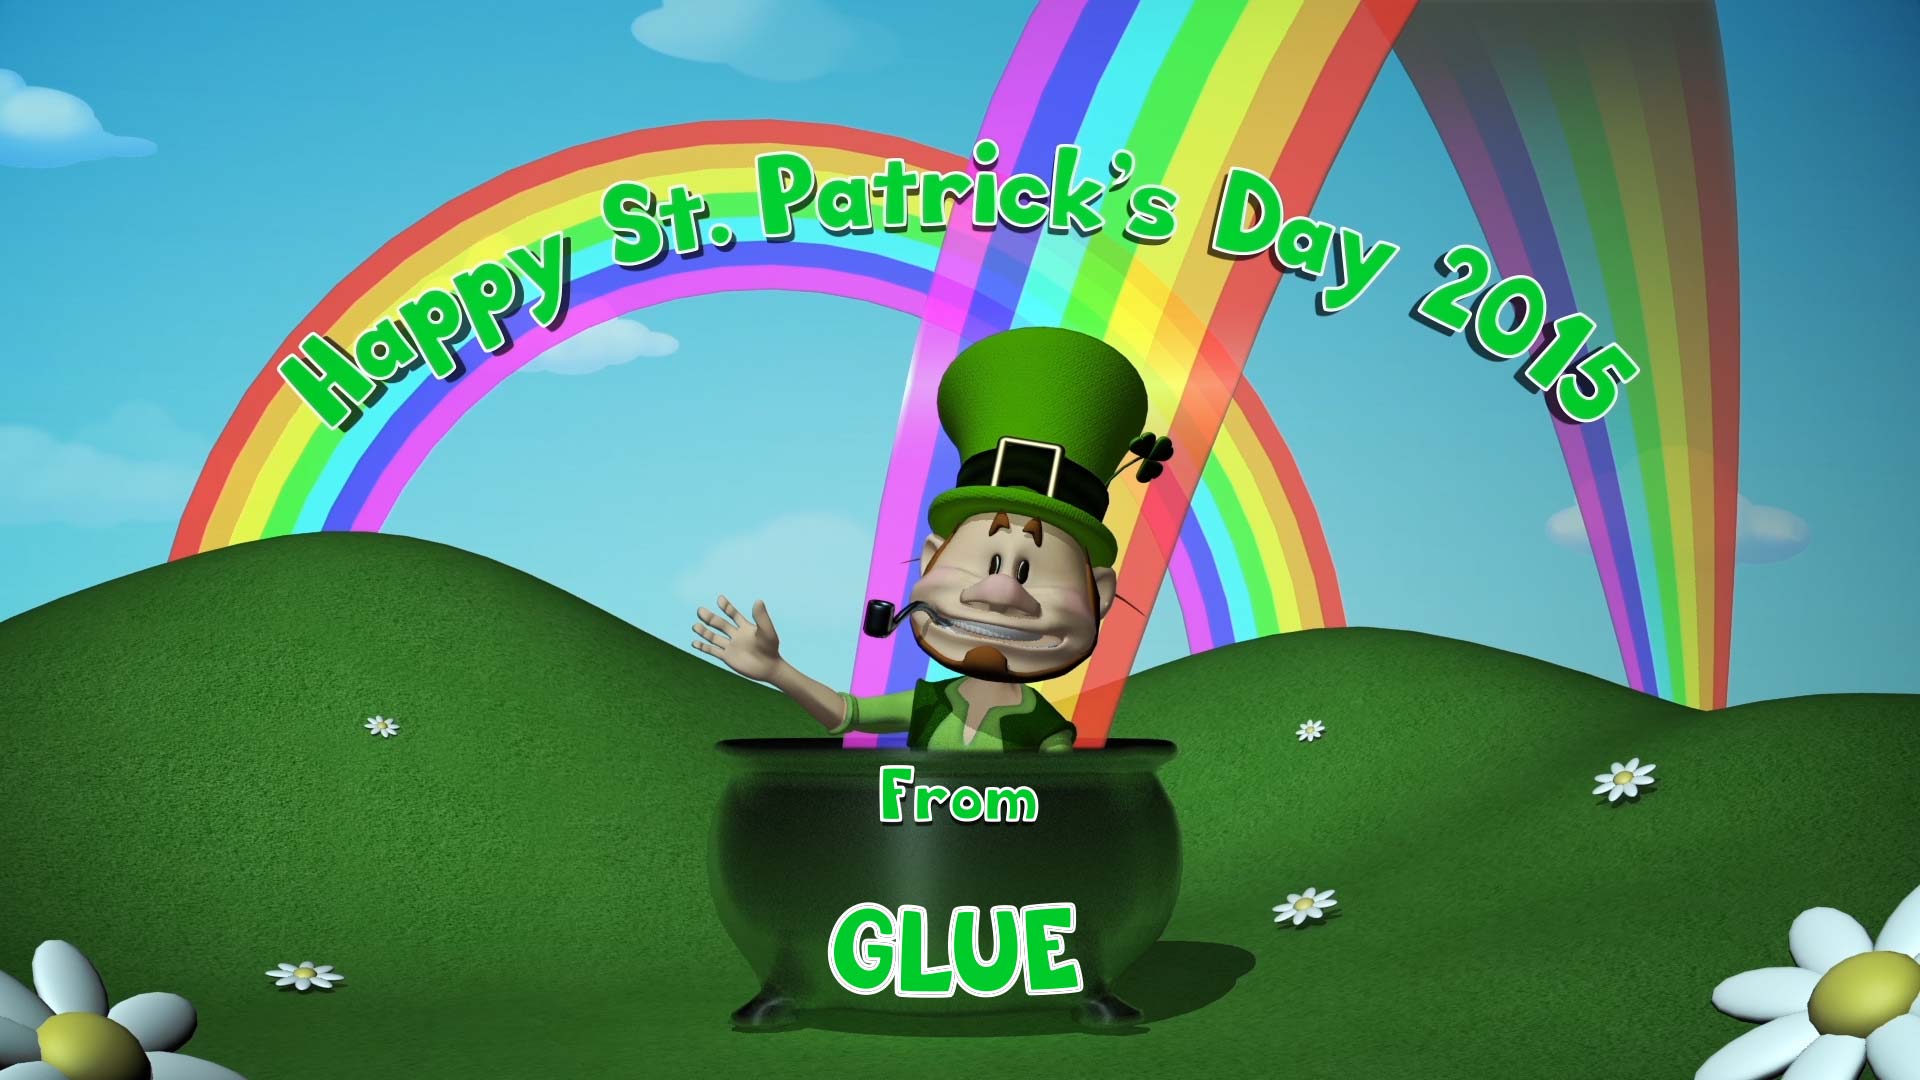 St. Patrick's Day Video Visual Effects